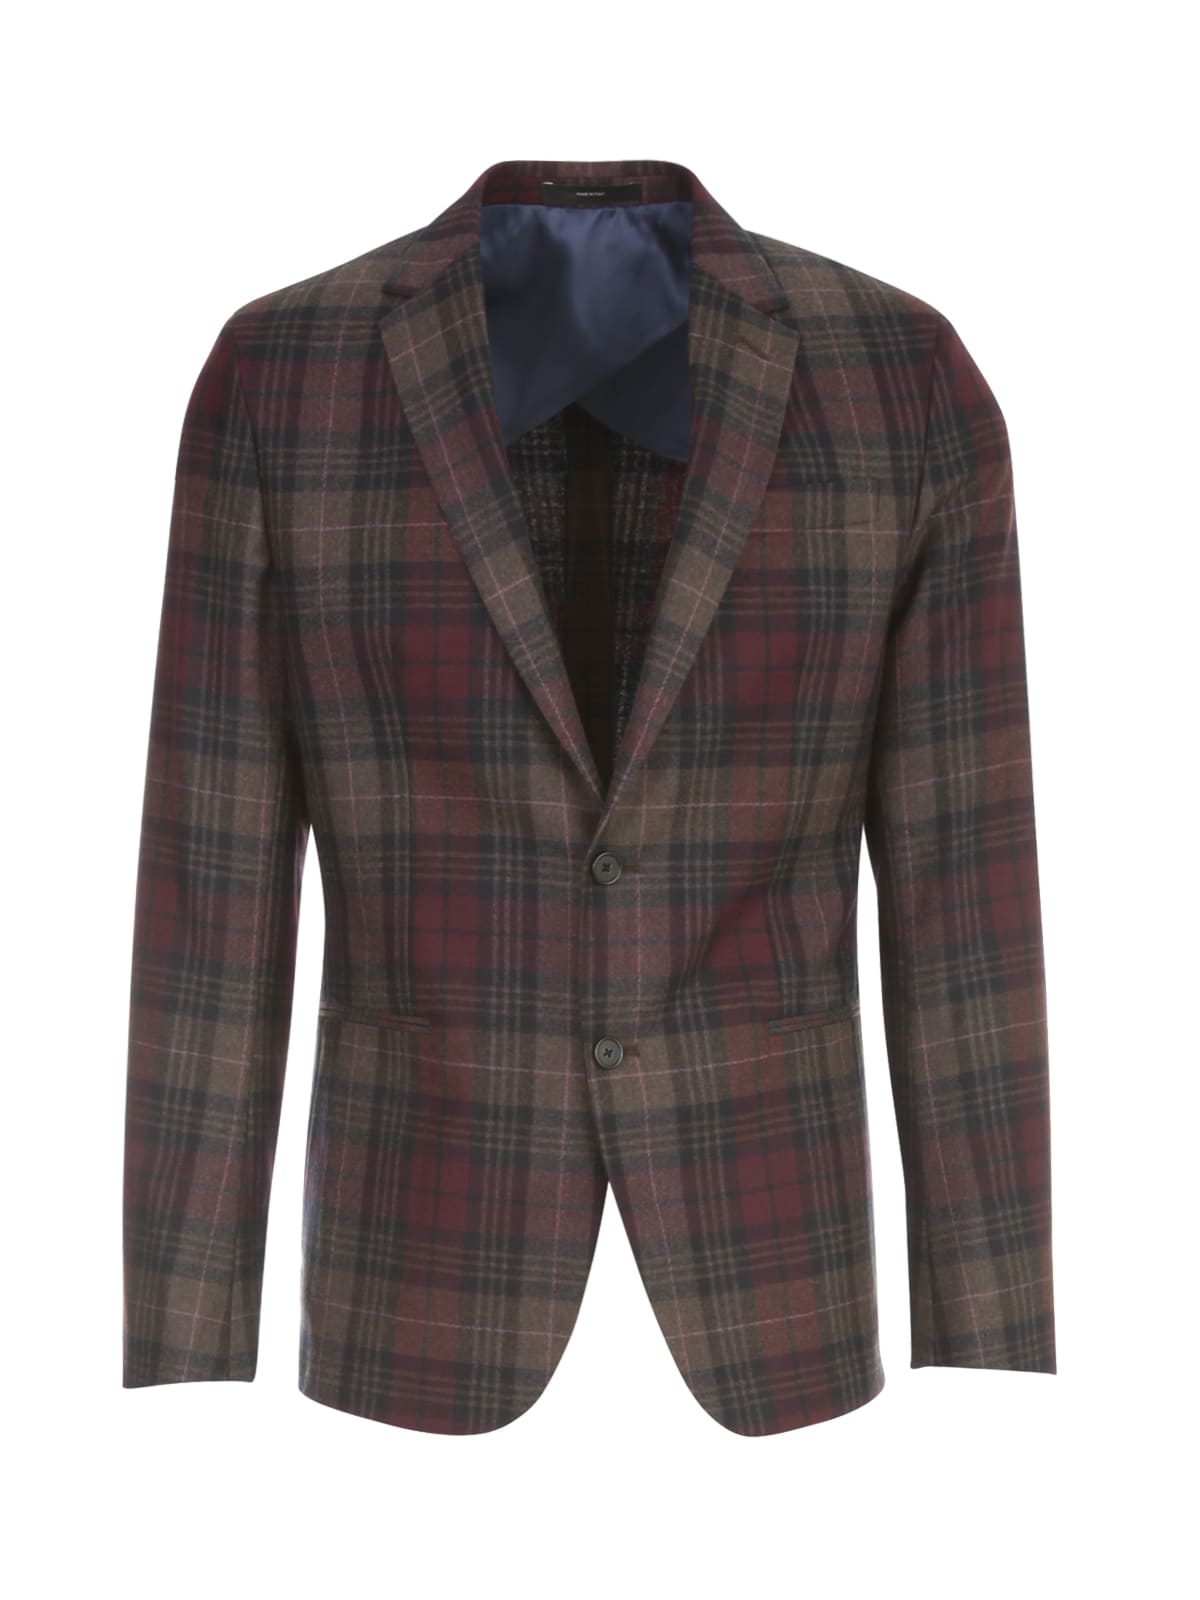 Paul Smith Gents Slim Fit Two Buttons Jacket